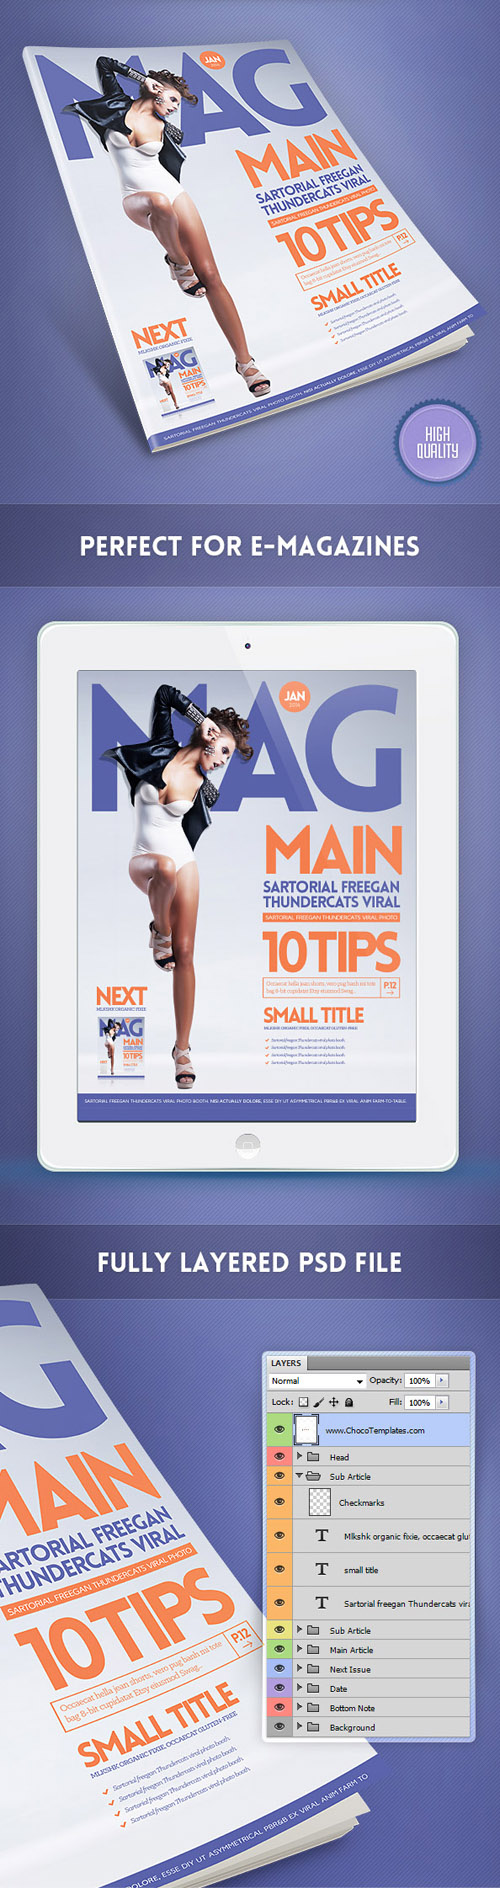 Cover of Magazine & iPad - PSD Template